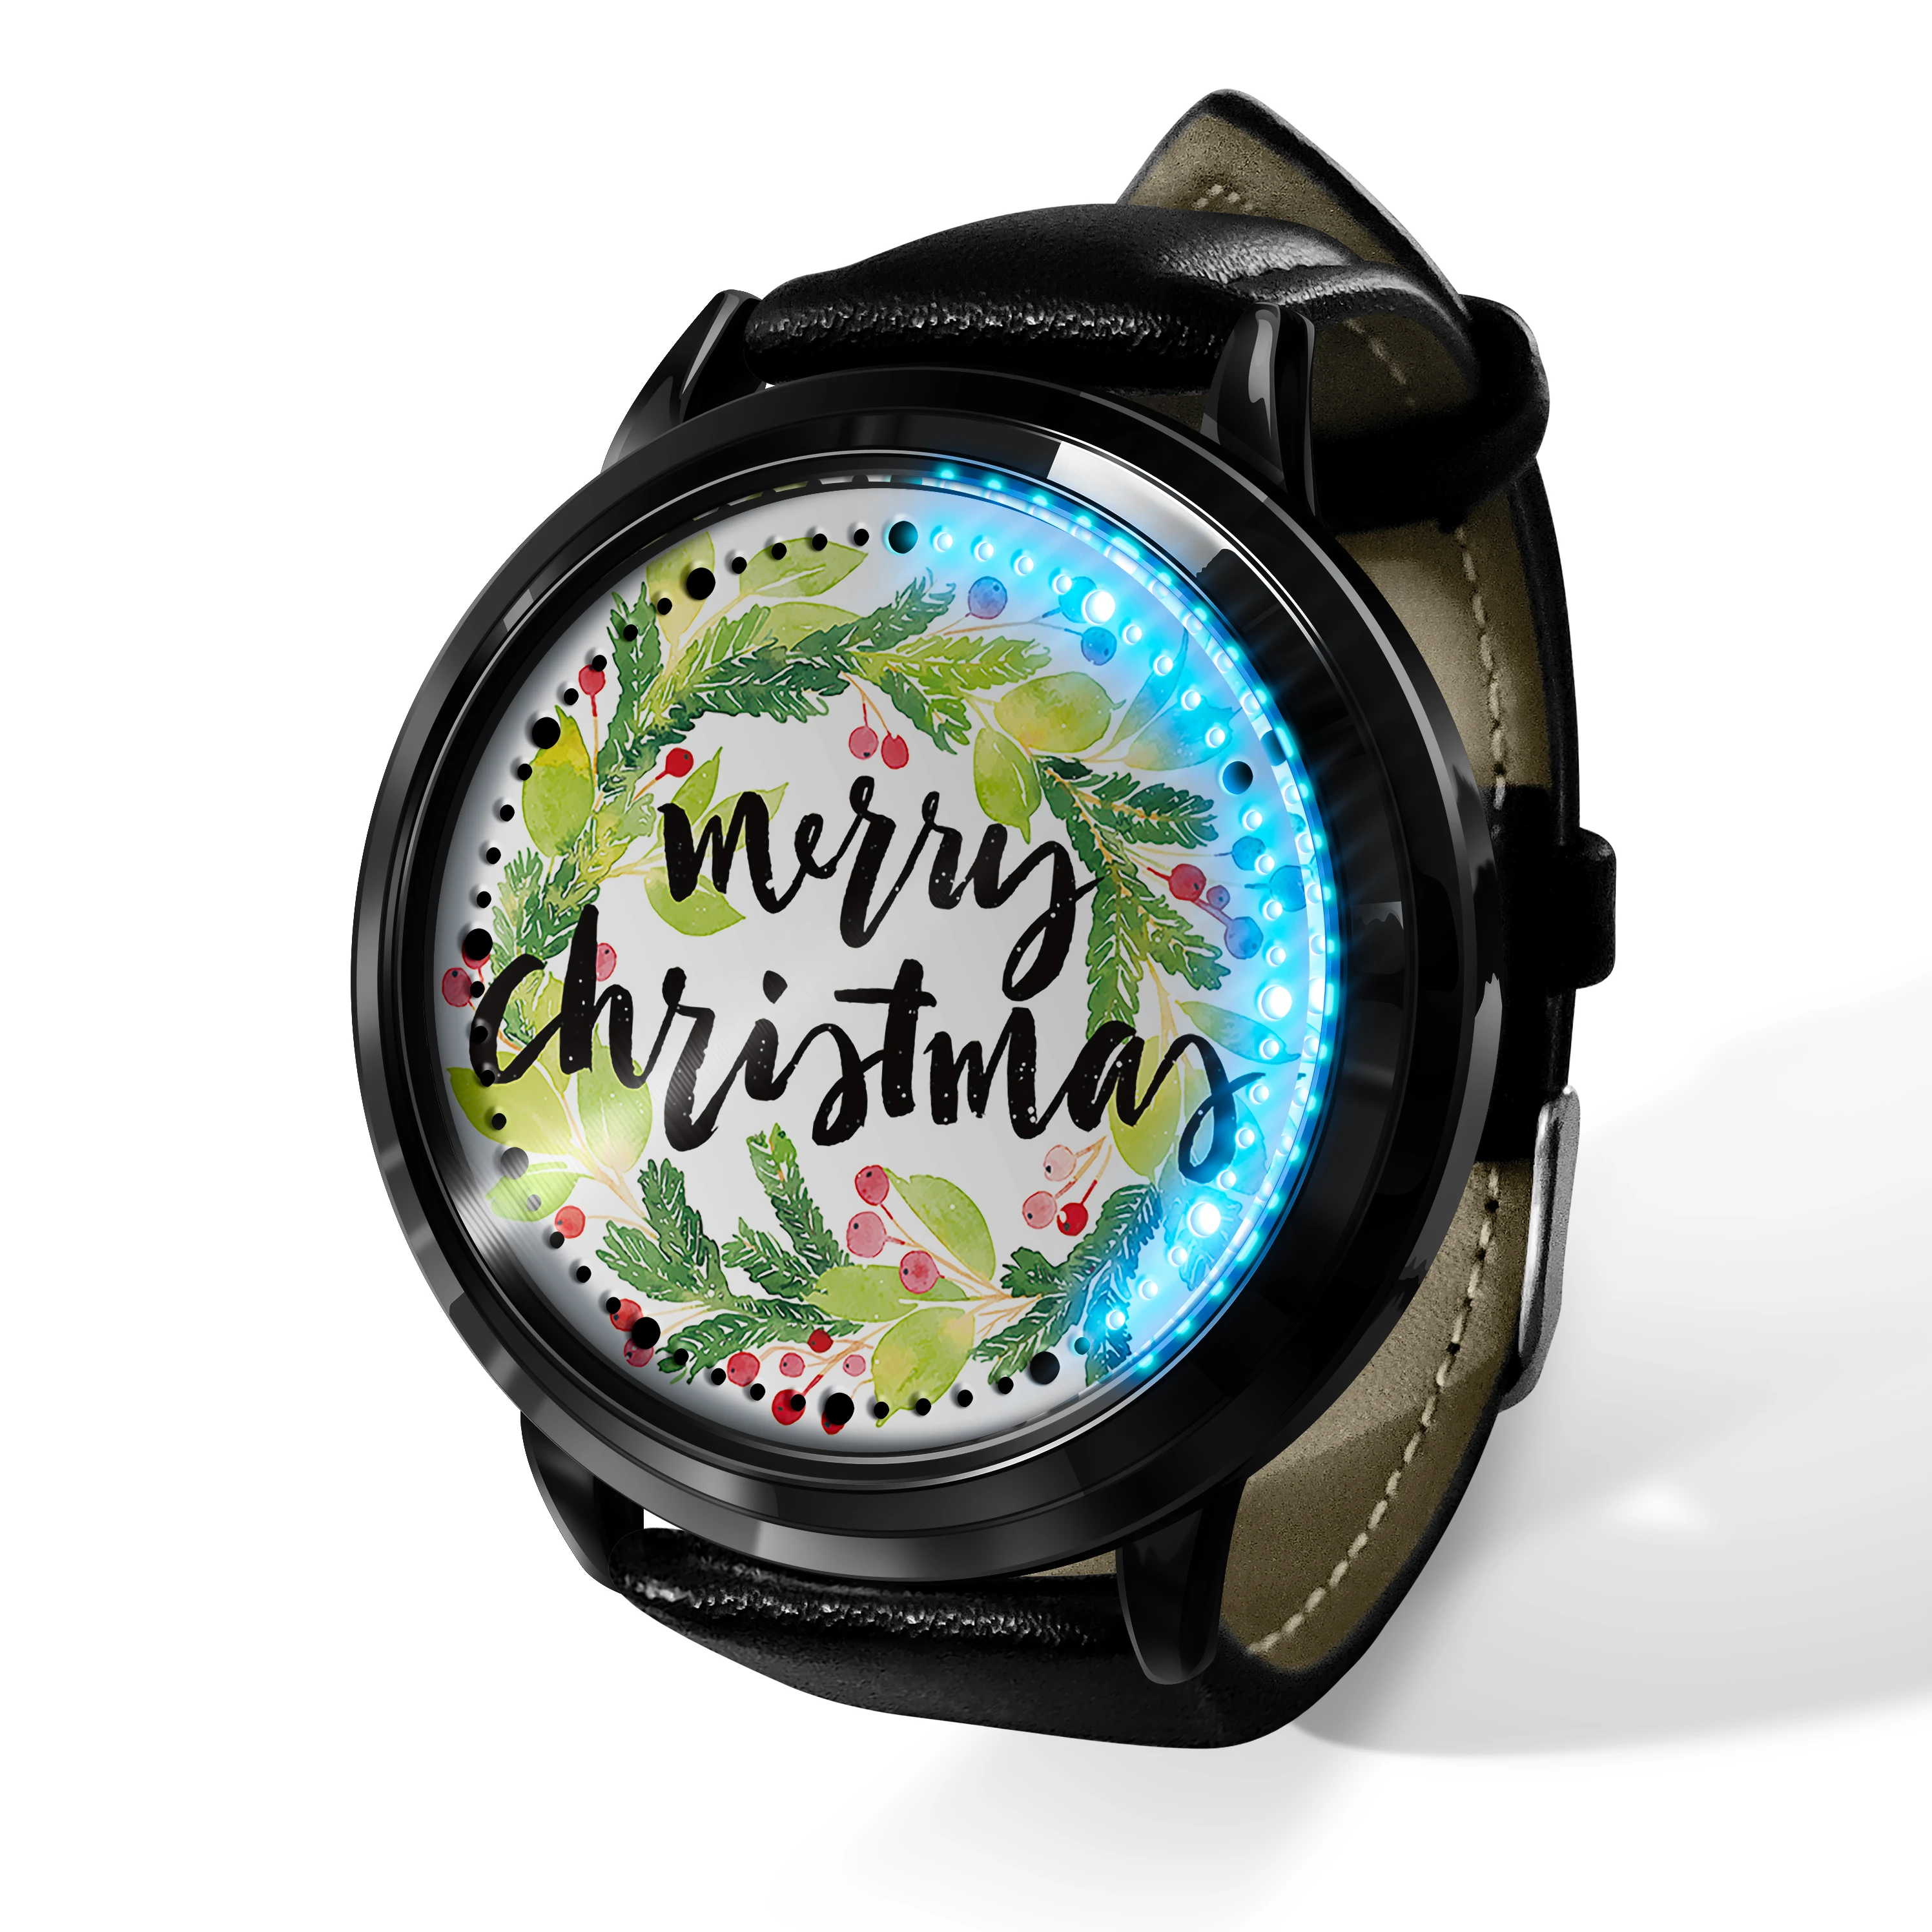 

New Christmas dial printing, LED touch screen watch, men's wrist decoration watch, can be given as a gift